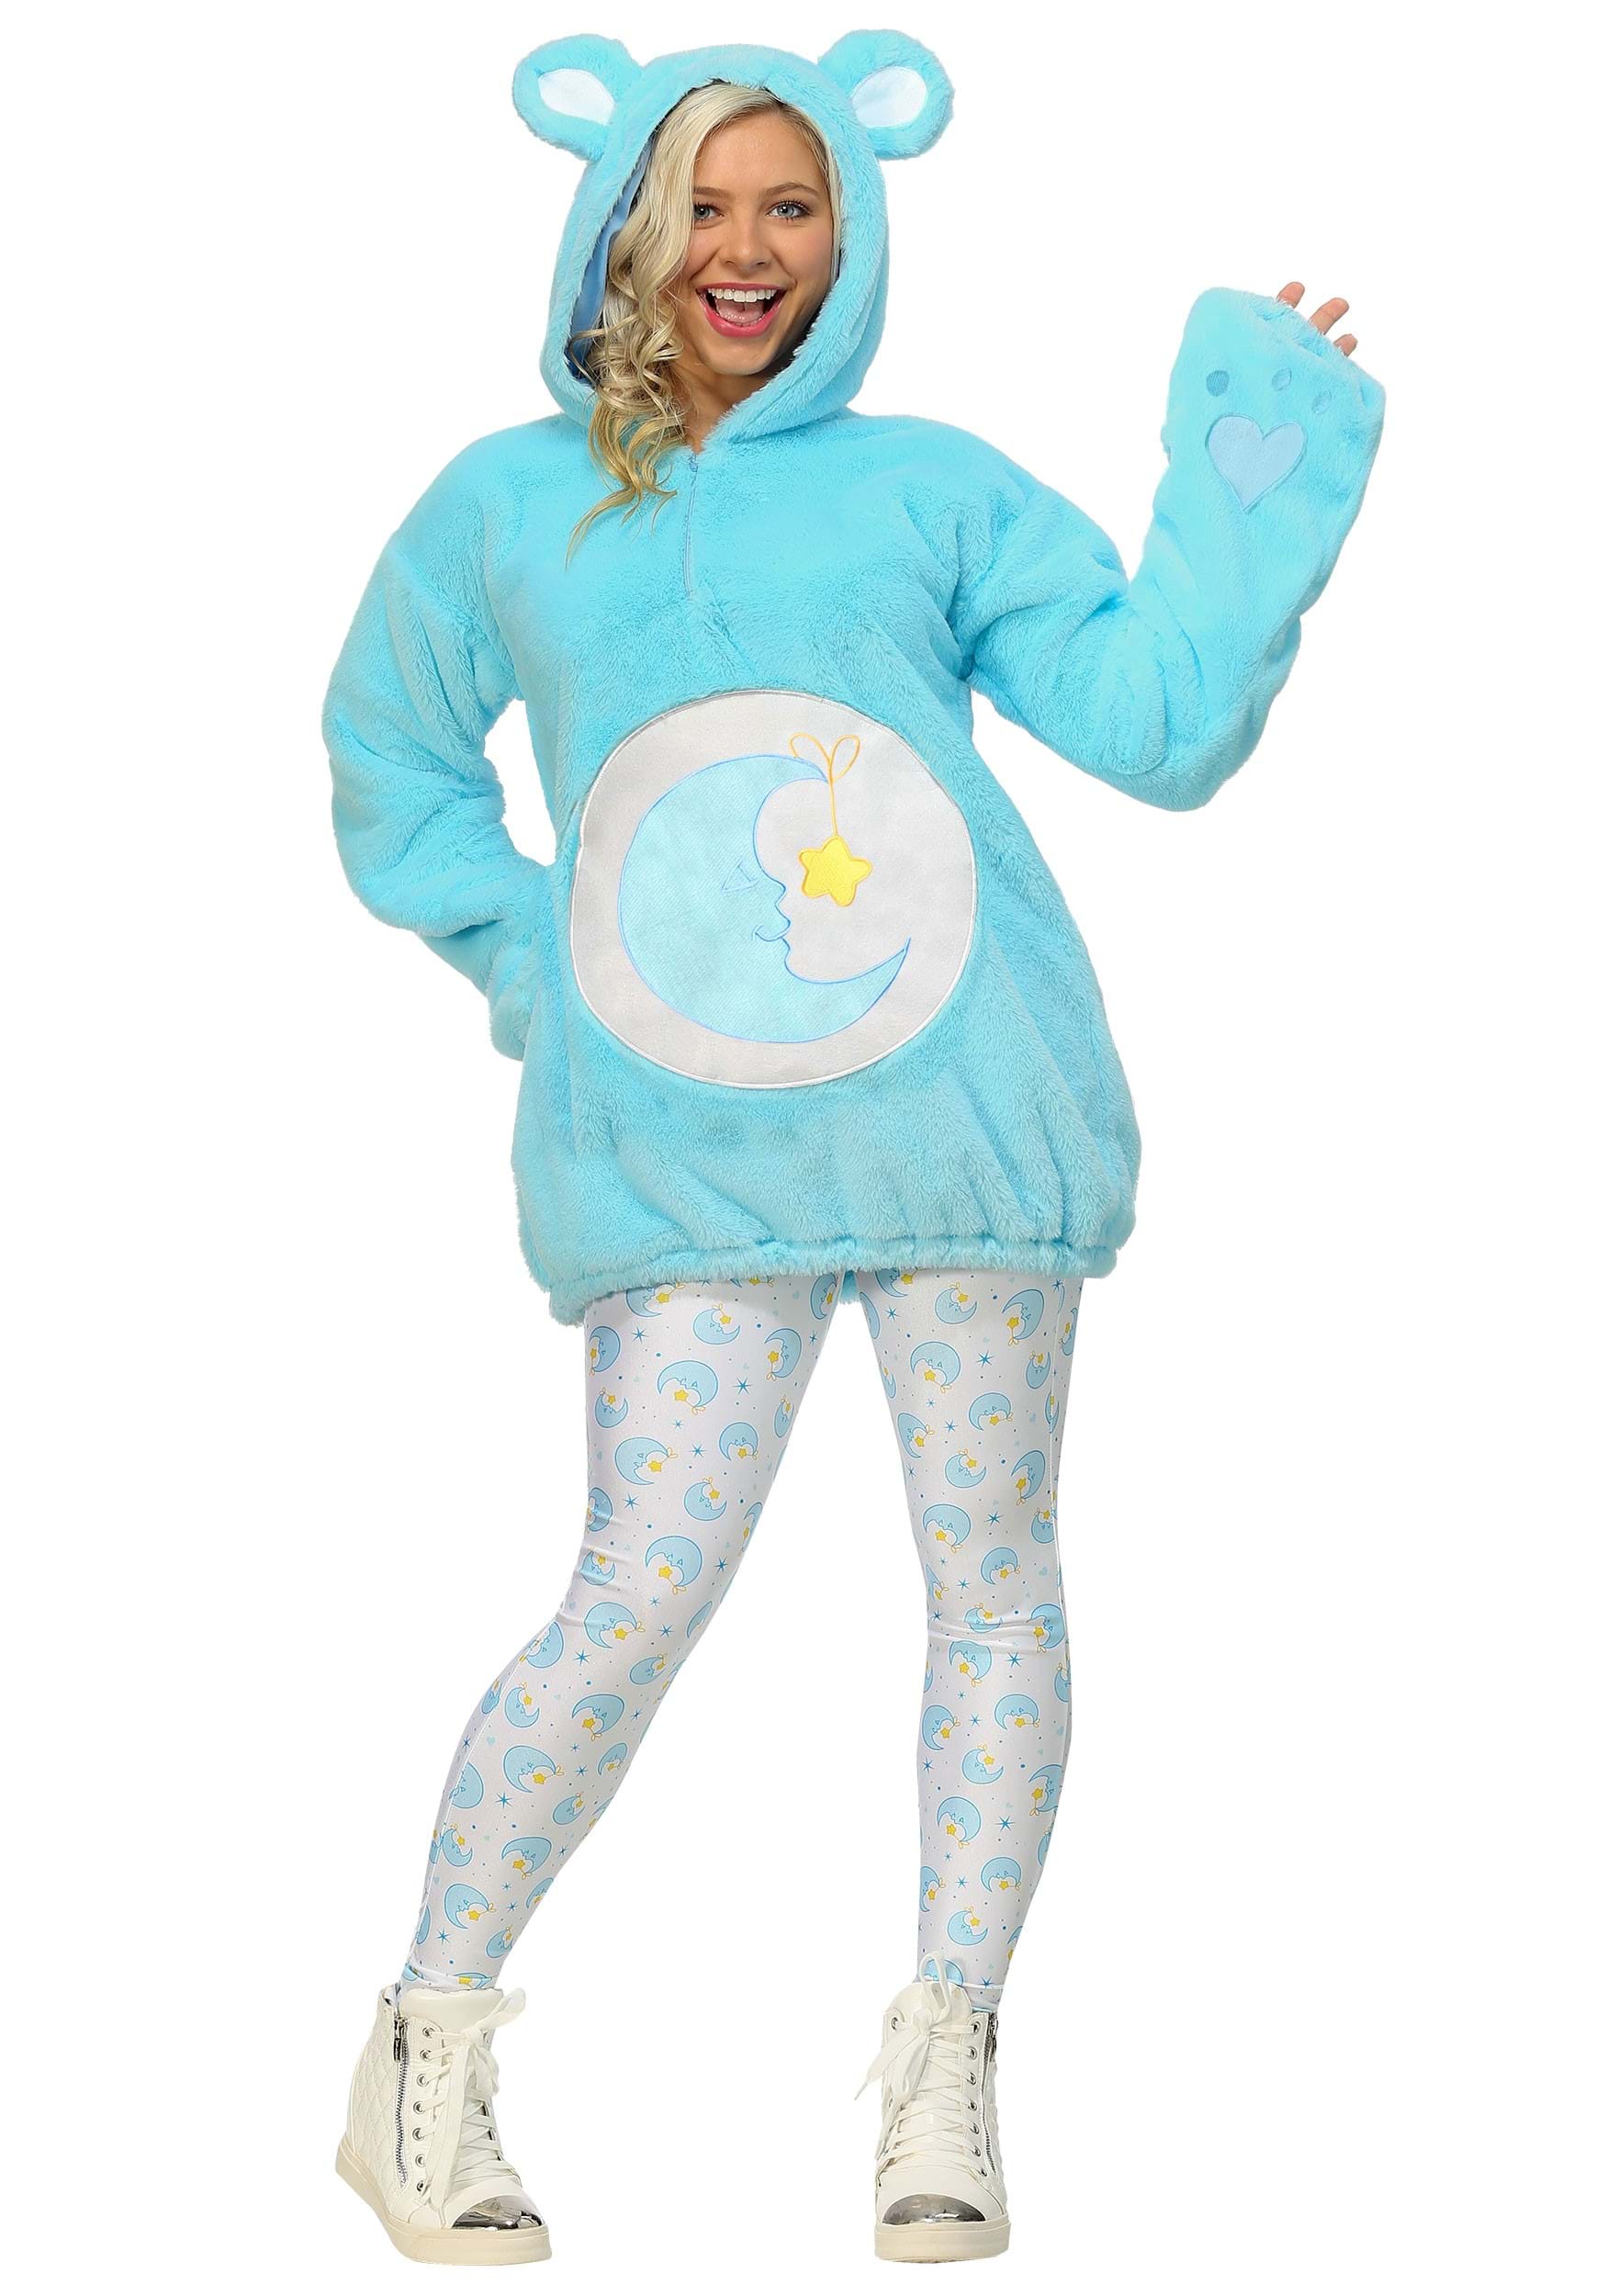 Photos - Fancy Dress CARE FUN Costumes  Bears Deluxe Bedtime Bear Hoodie Costume for Women Blue& 